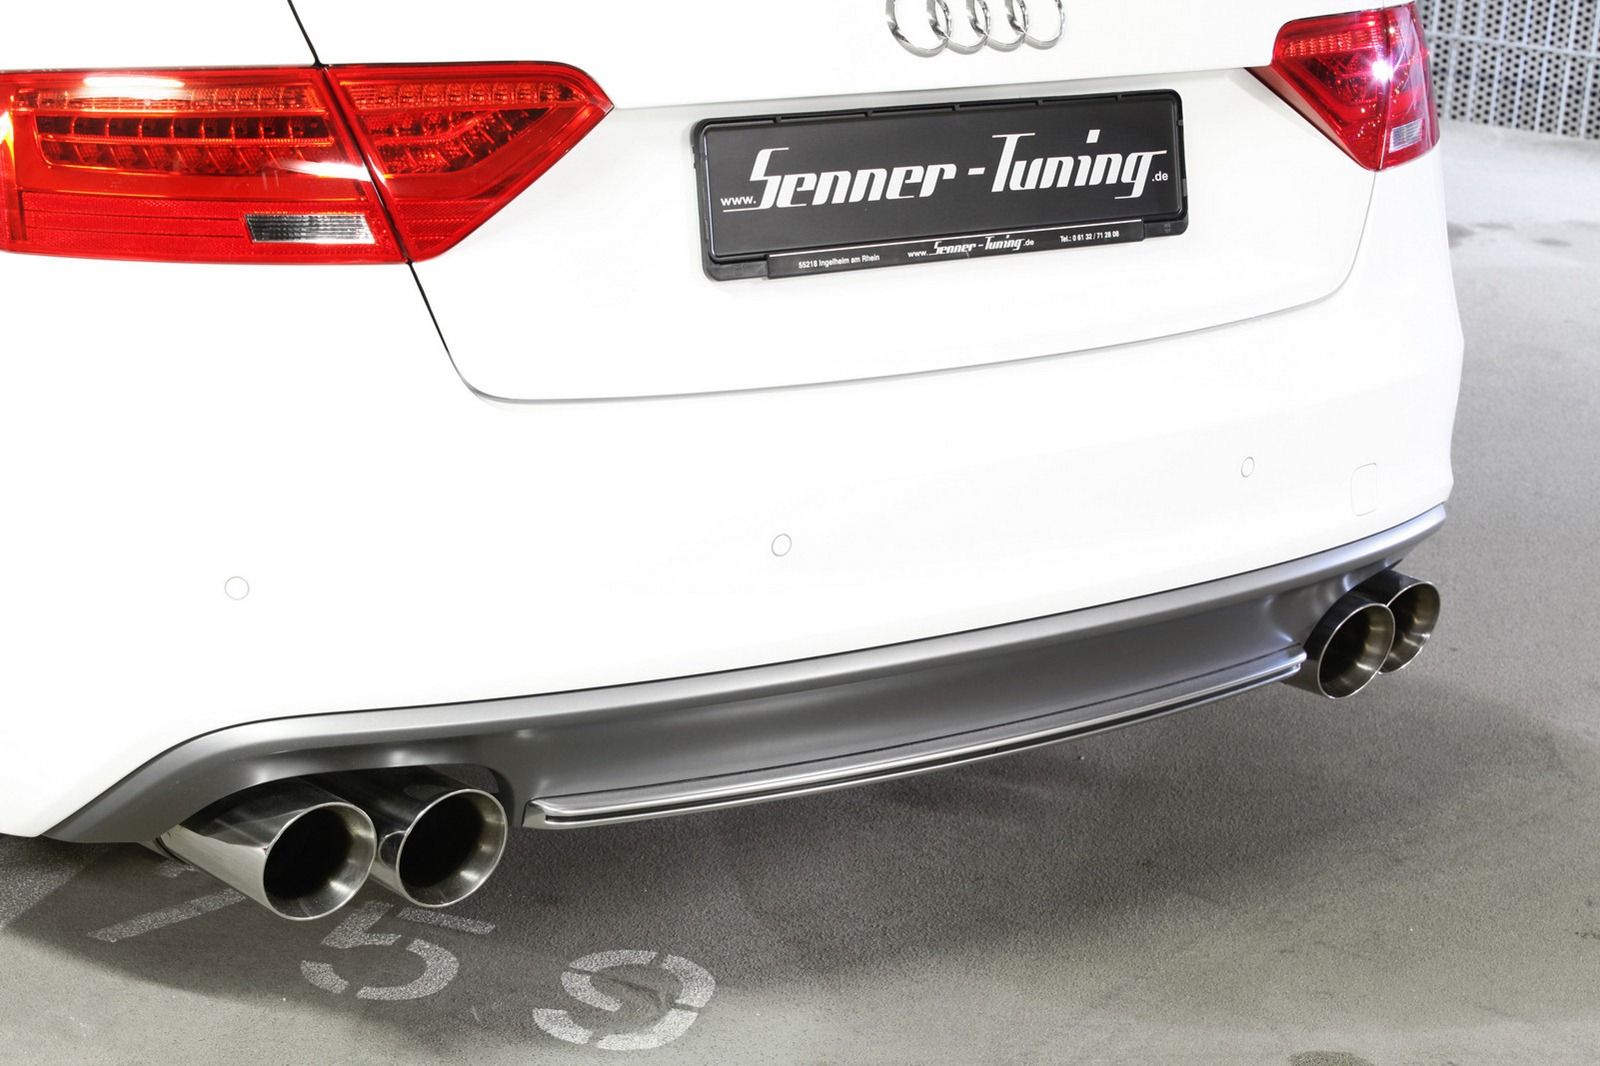 2012 Audi S5 Coupe by Senner Tuning